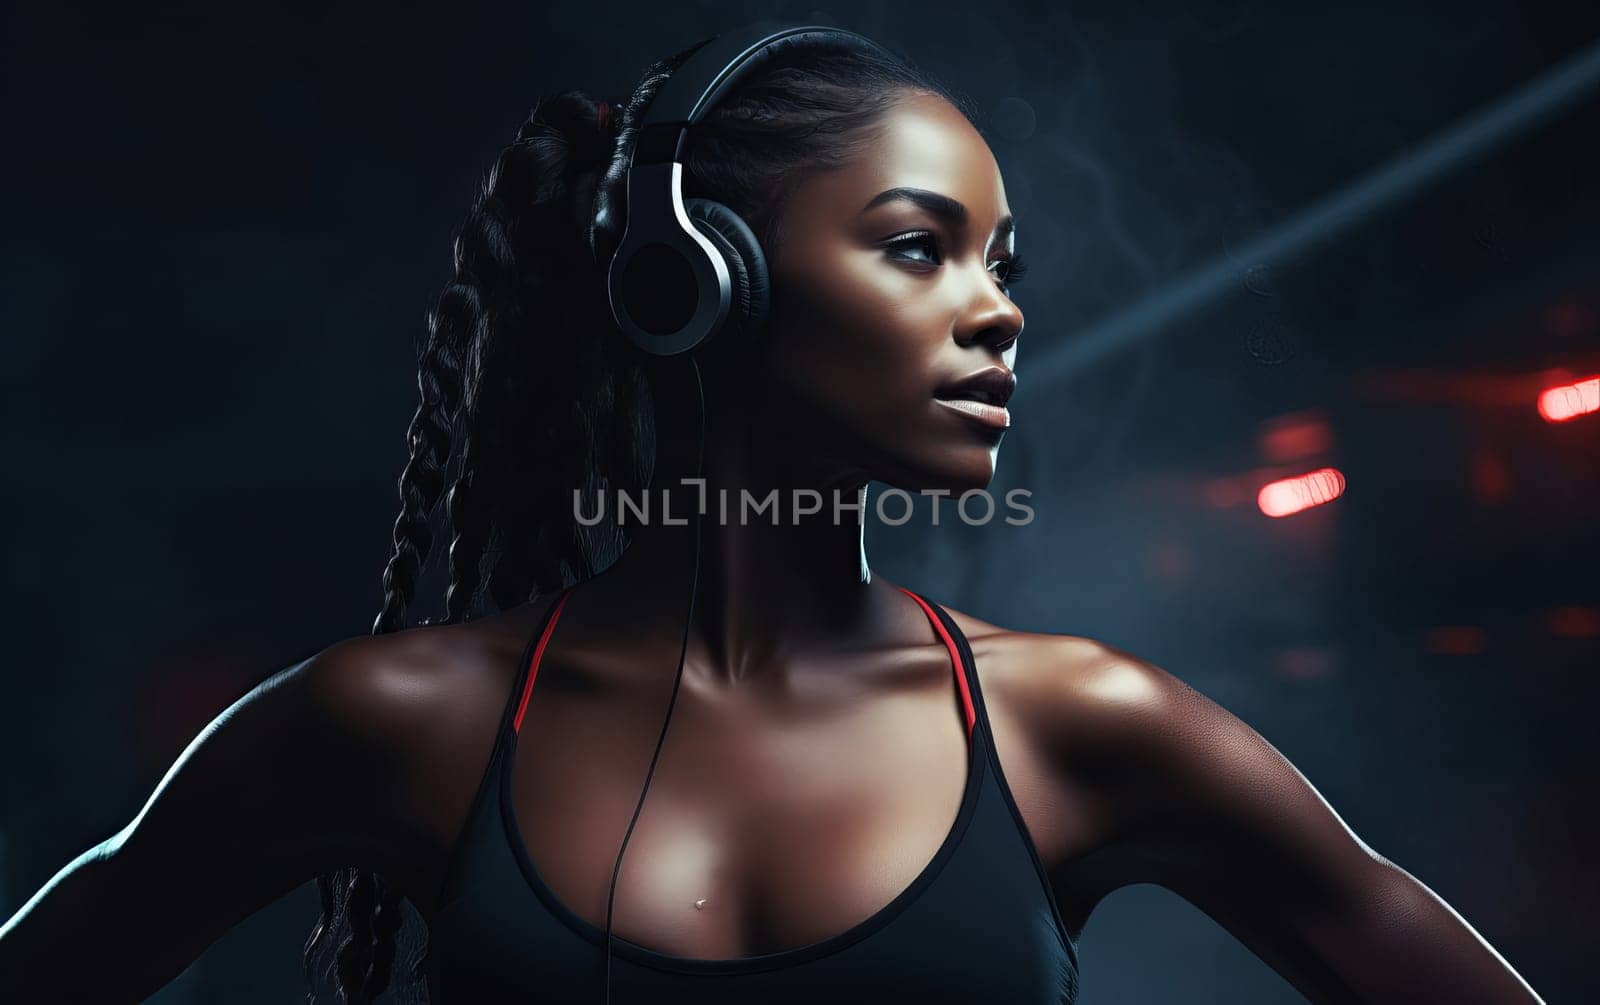 Beautiful African american girl fitness coach. A young athletic woman listens to music on headphones and gets ready for workout. Healthy lifestyle. AI